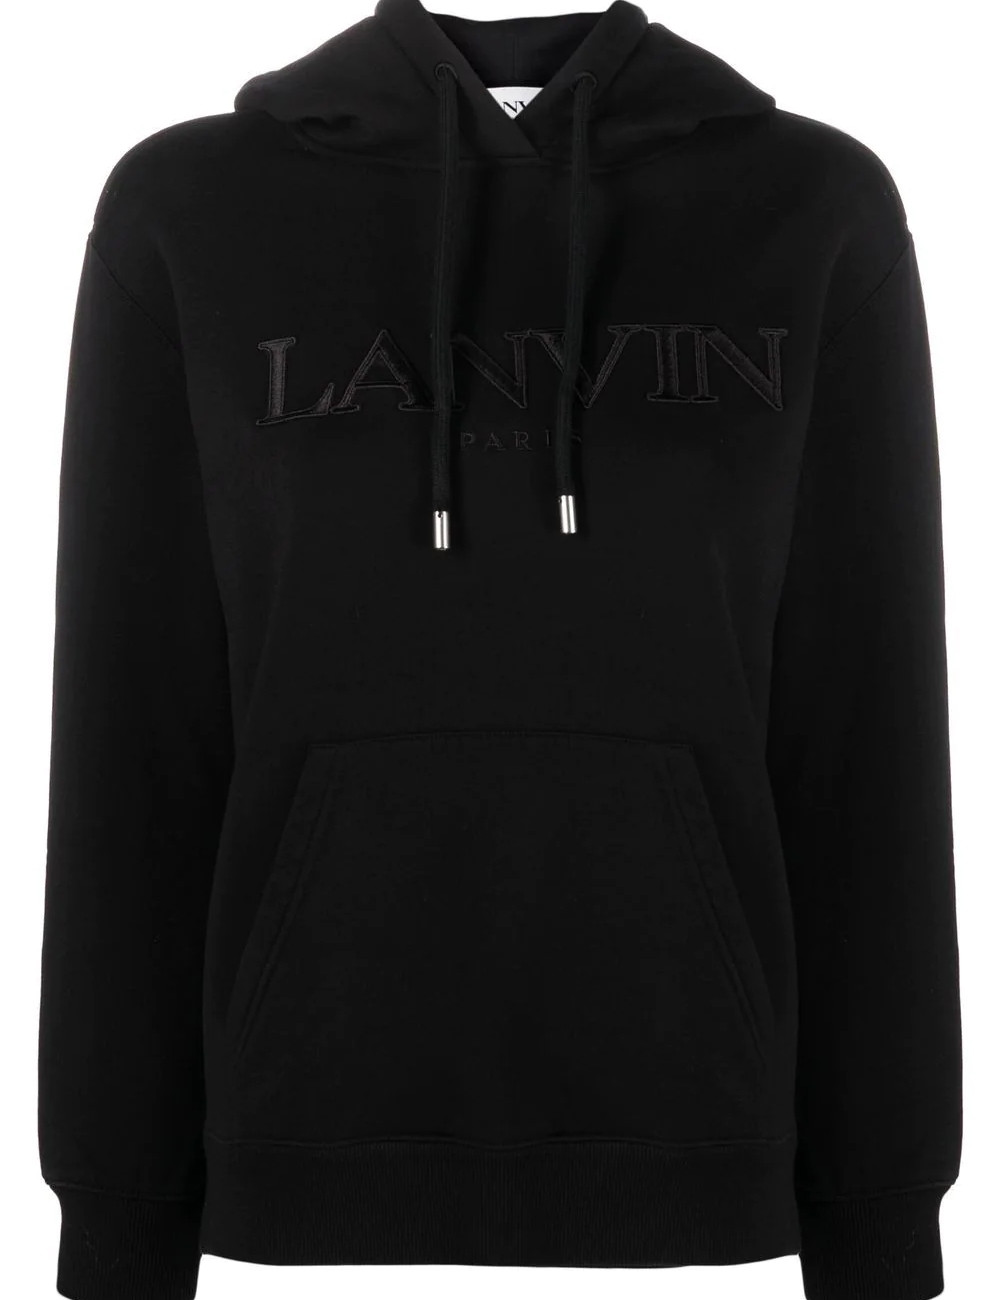 Women's Embroidered Hoody